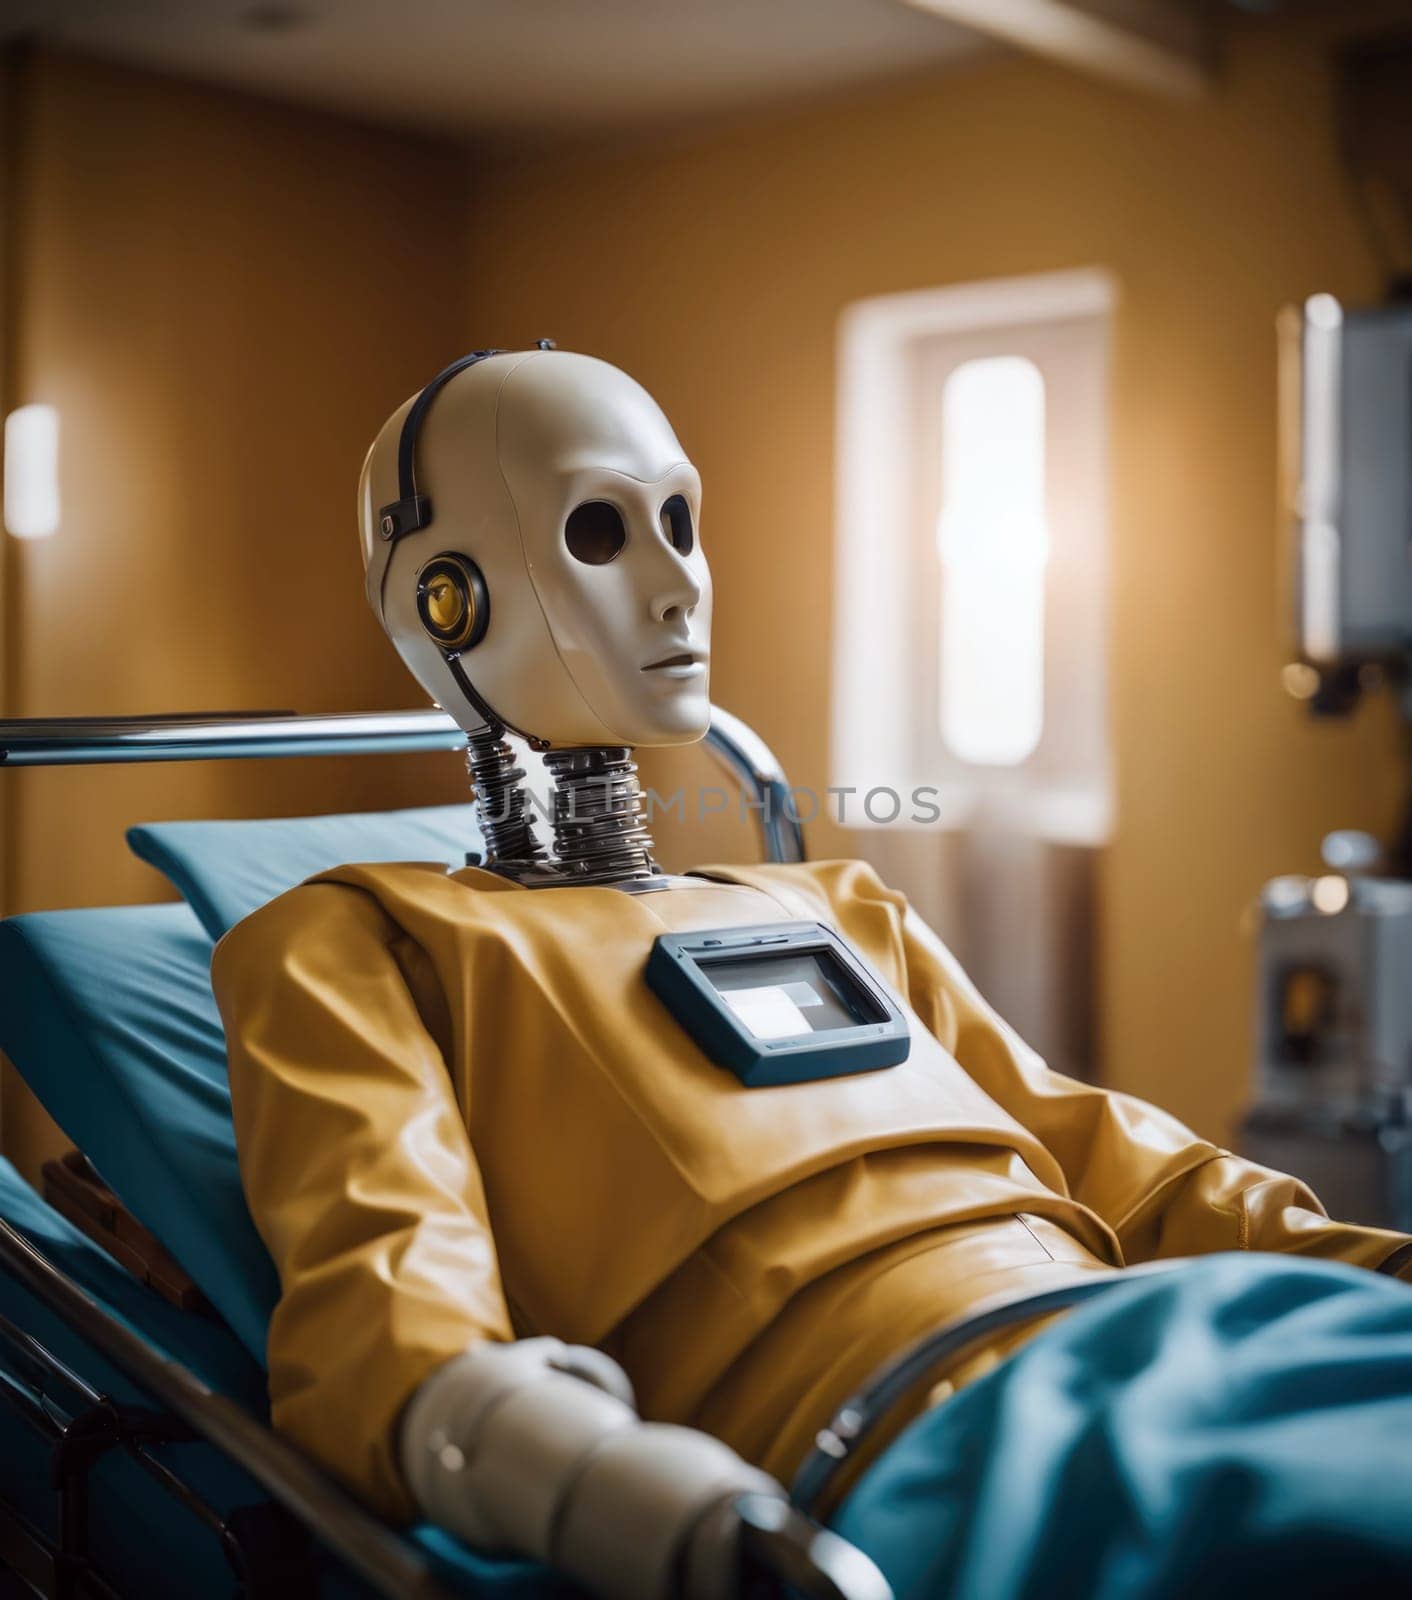 android at the hospital. Ai generation by vicnt